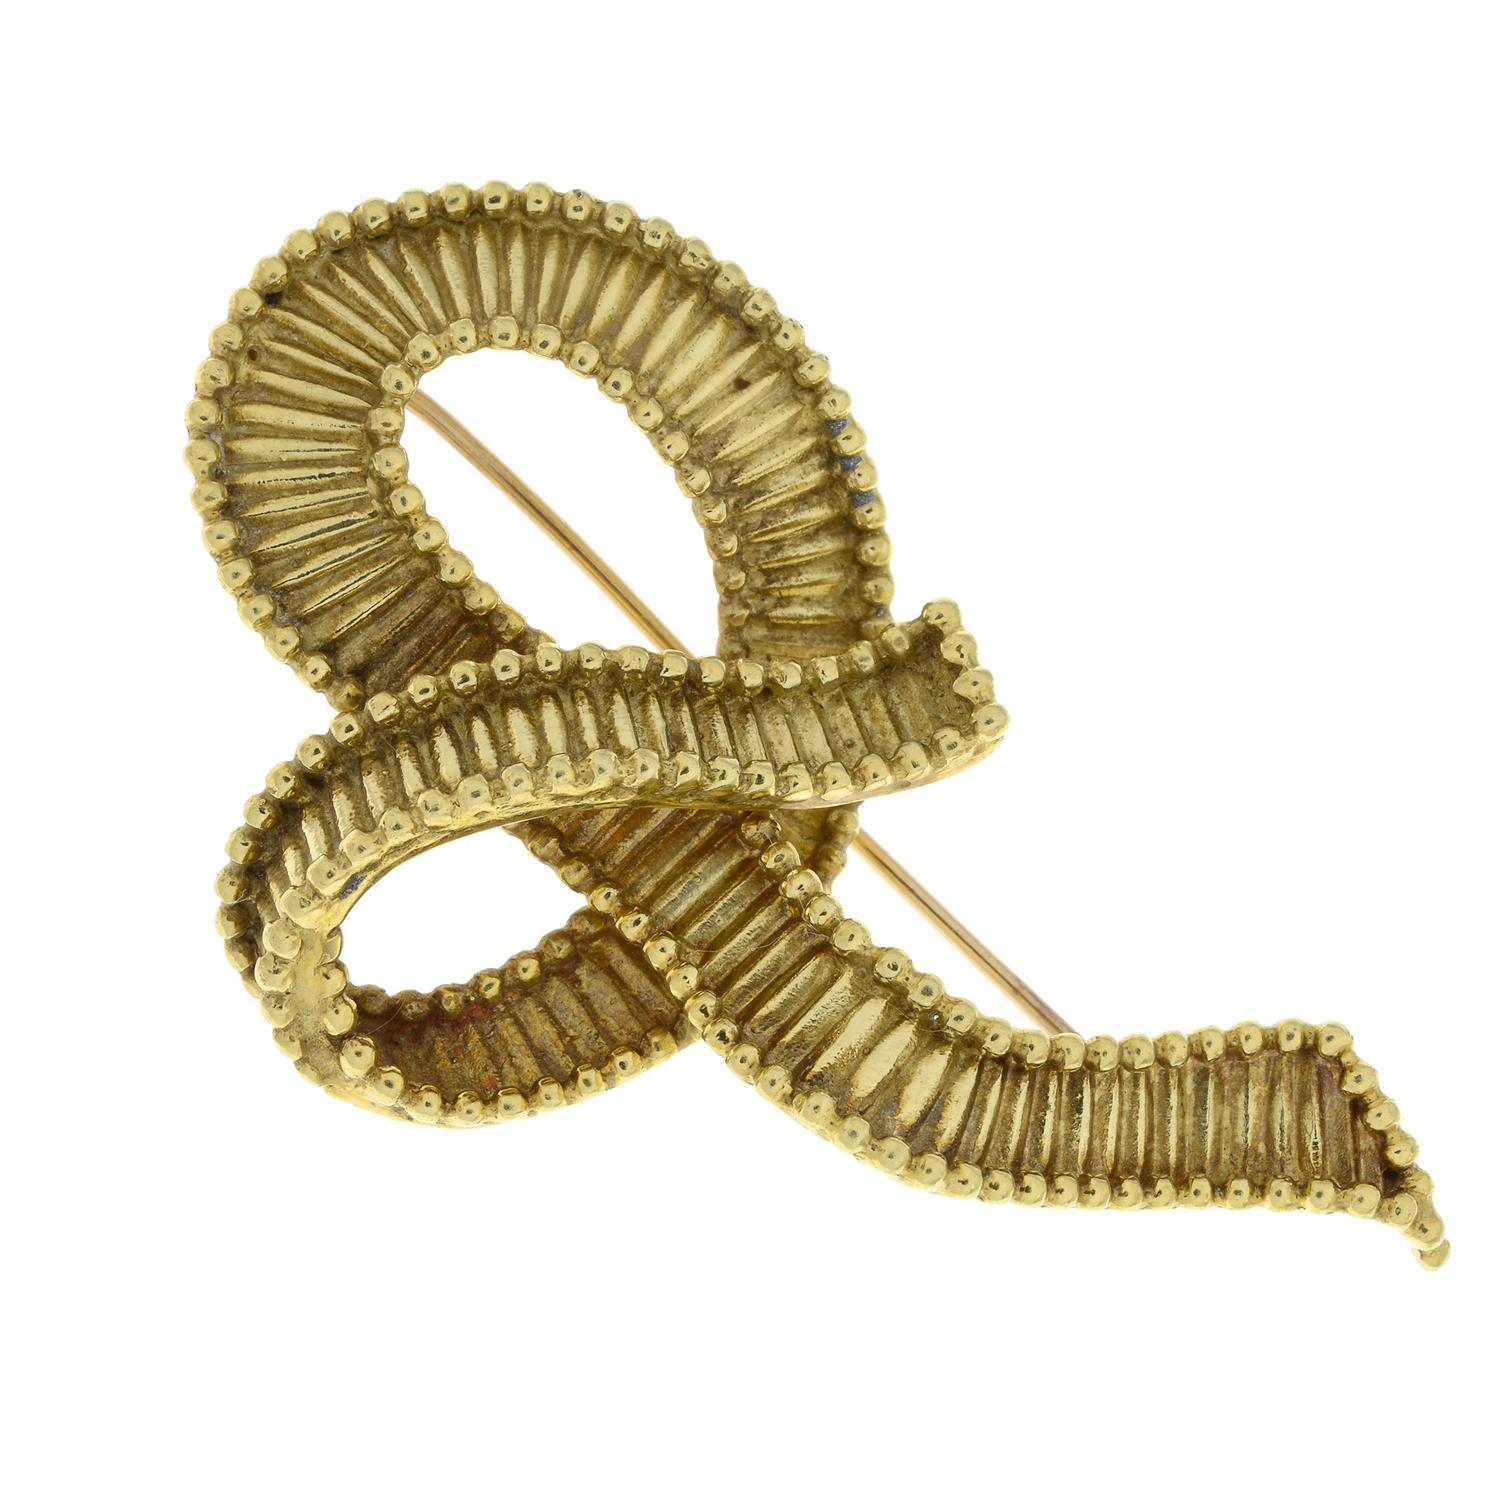 Mid 20th century 18ct gold brooch, by Cartier - Image 2 of 5